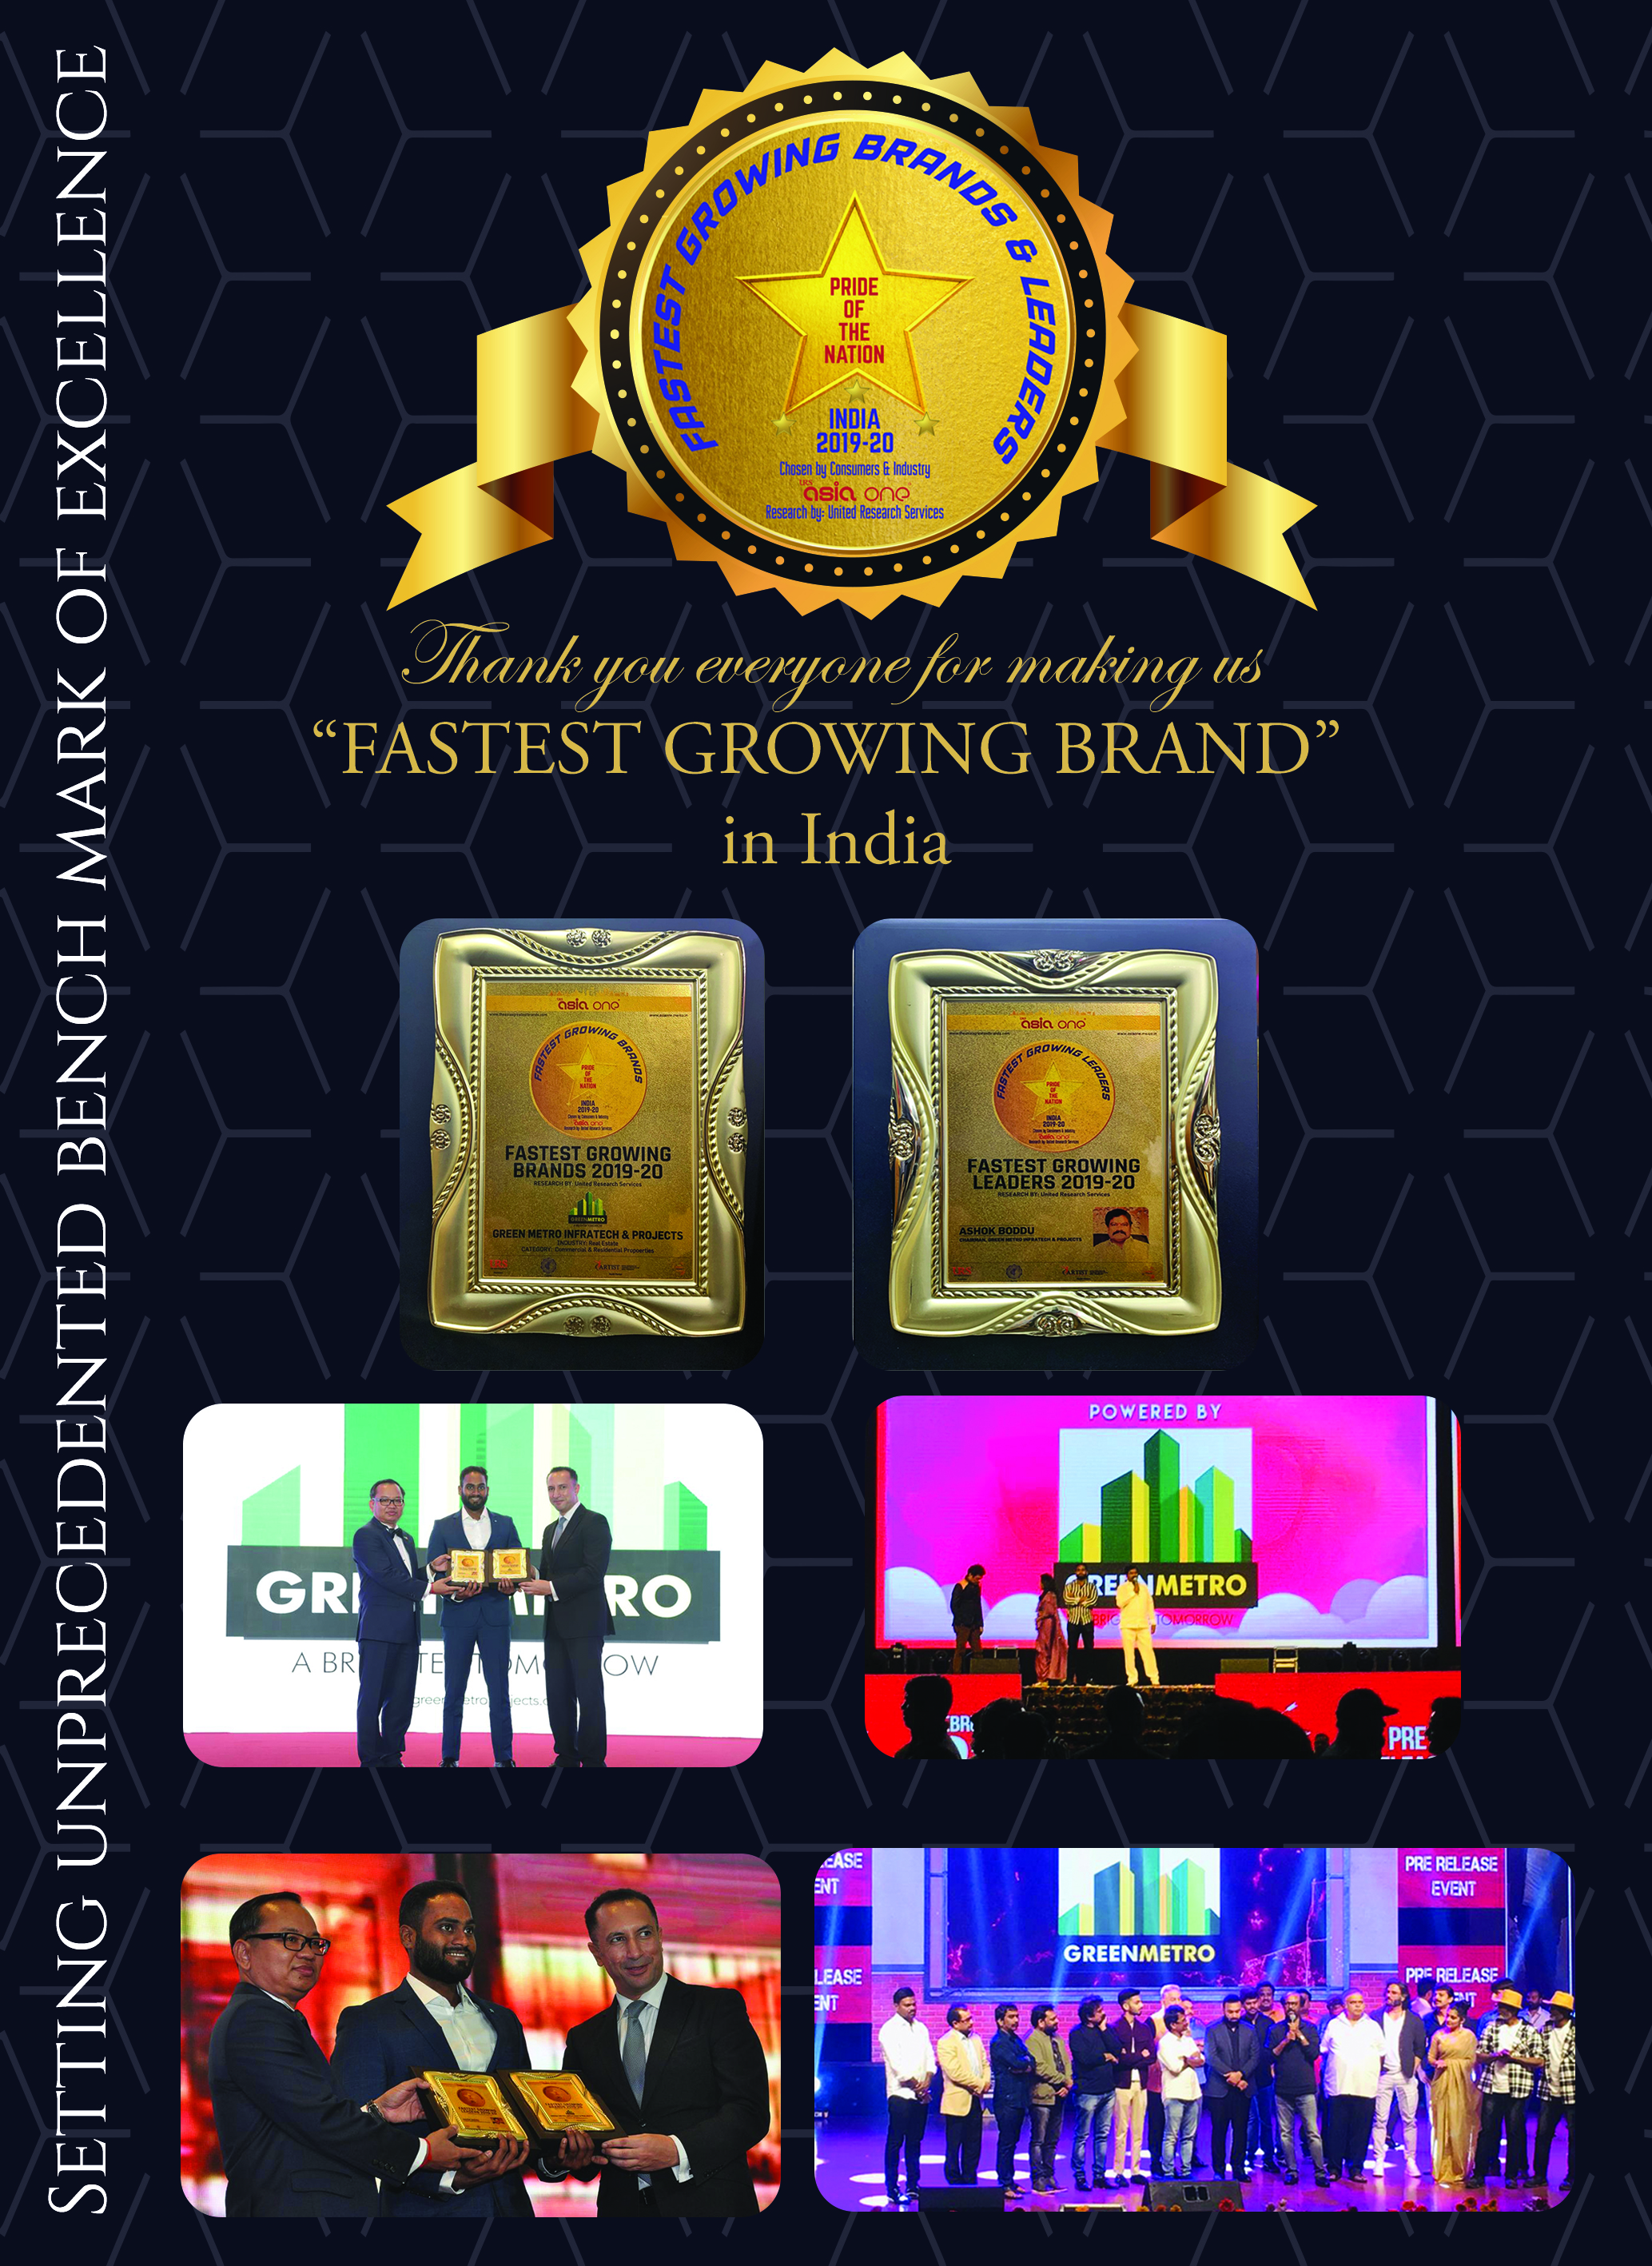 Awarded as fastest Growing Brand in India 2019-2020